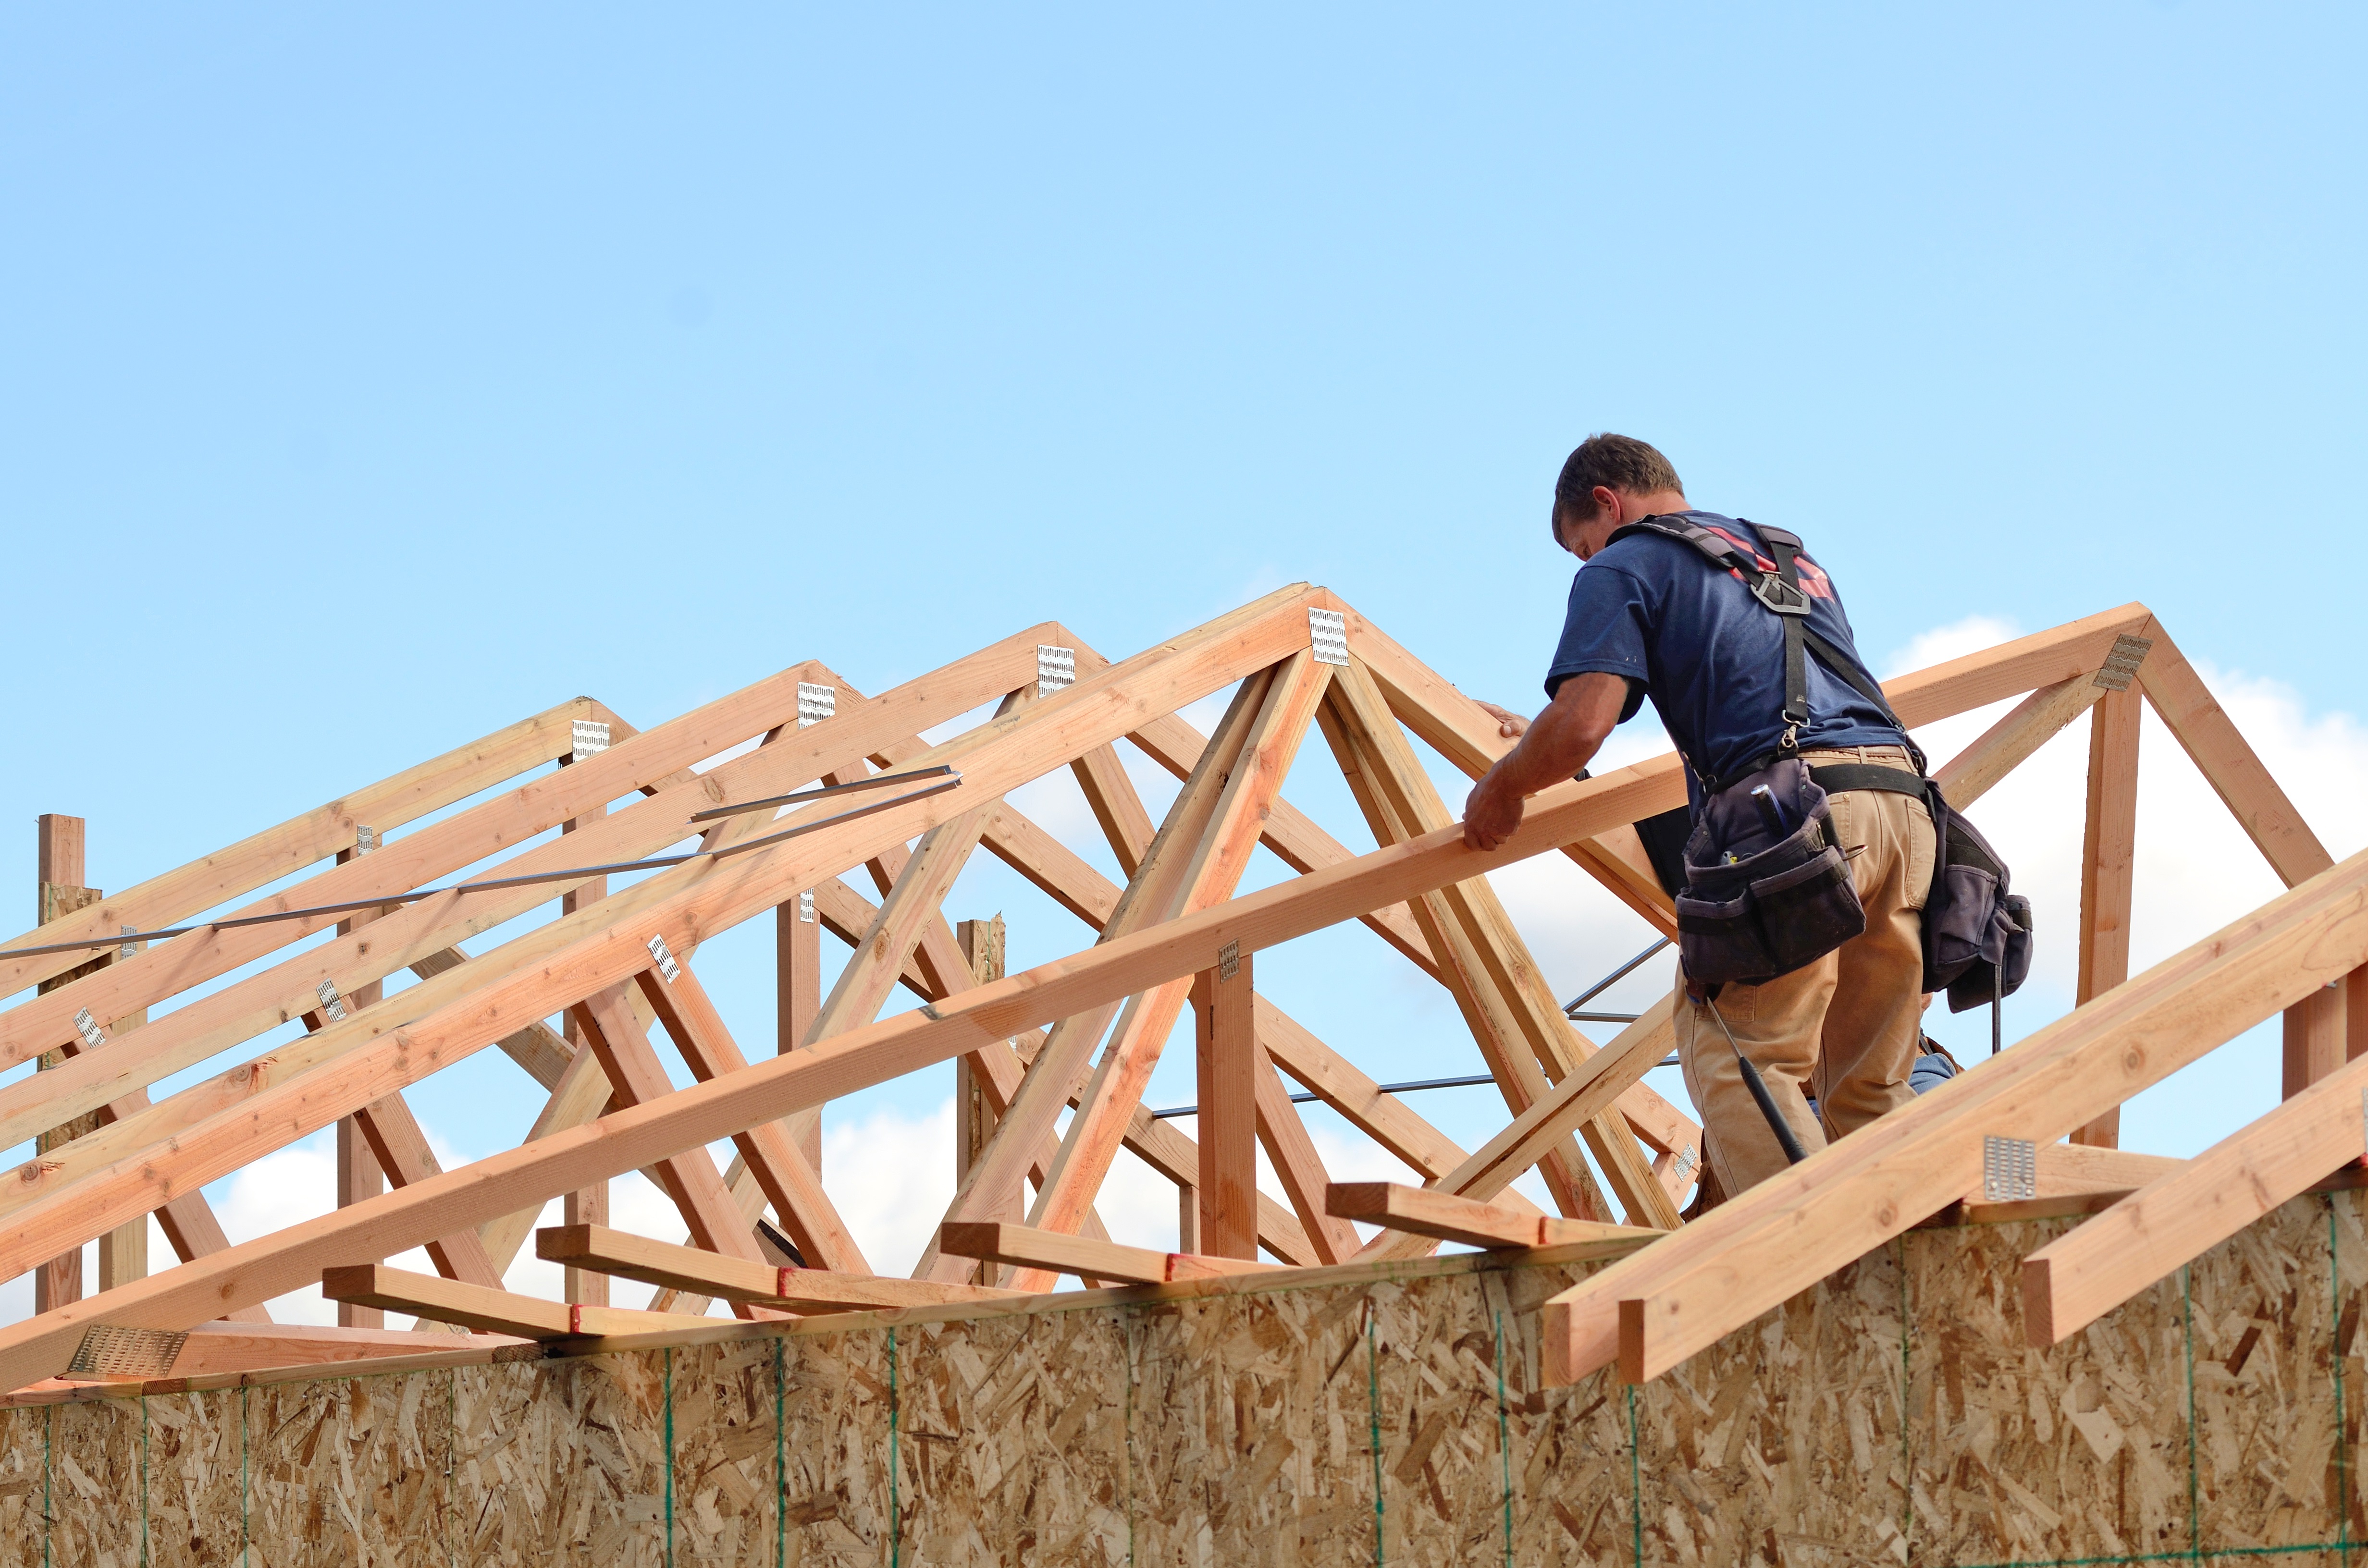 Construction worker piecing together a house frame